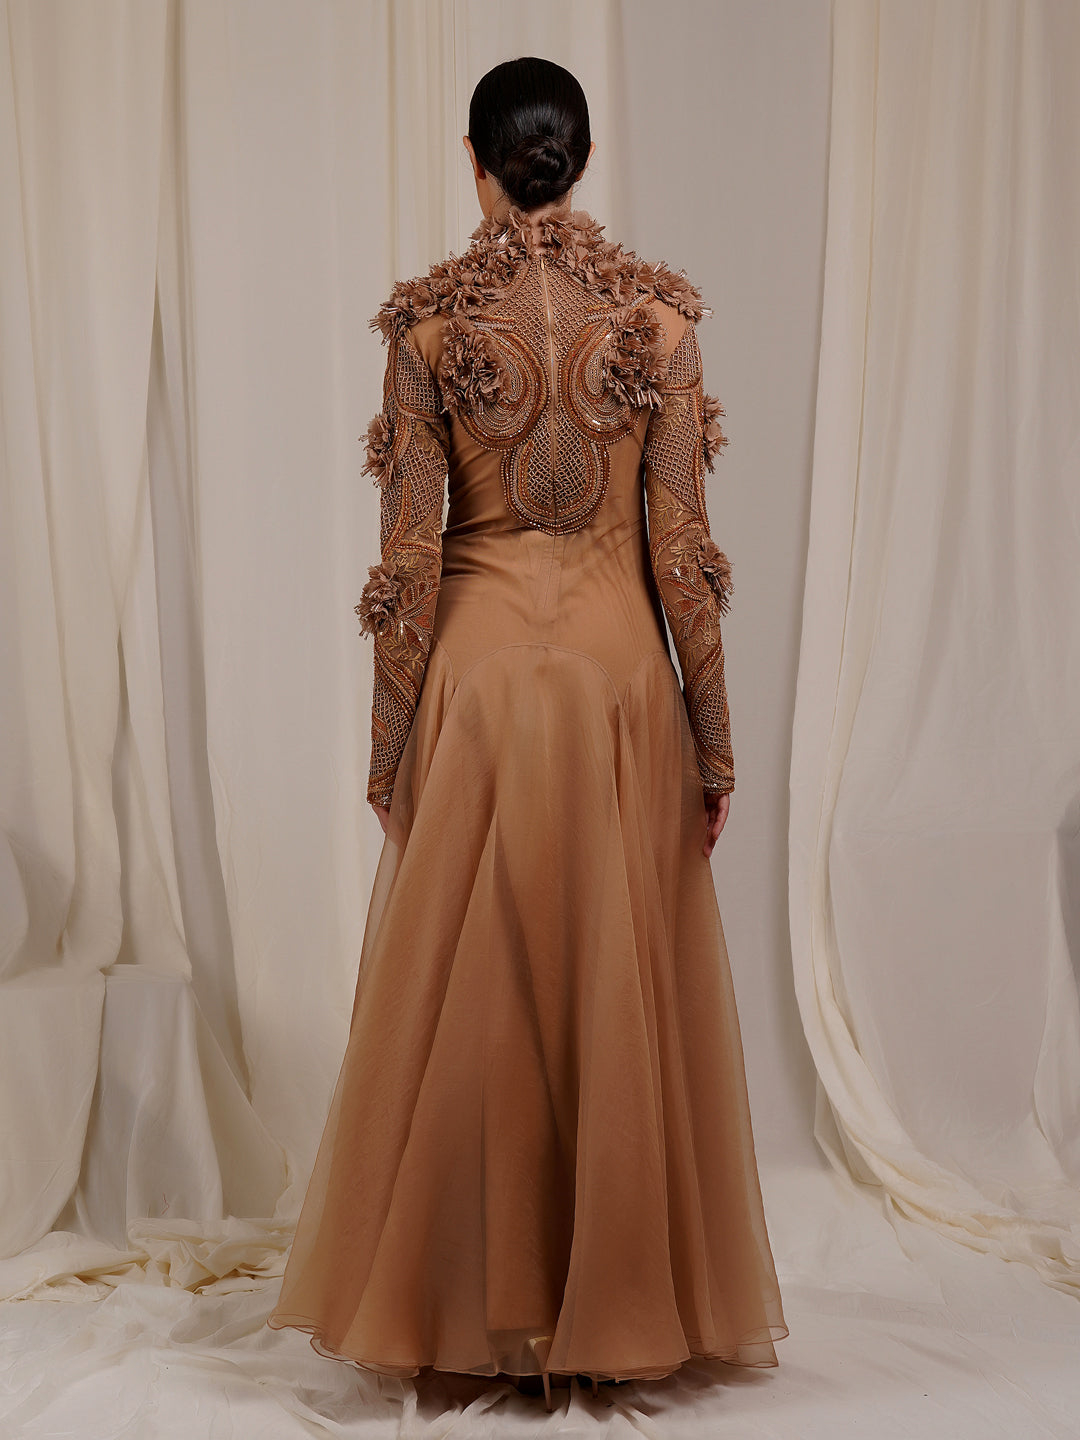 A  beige organza silk floor length gown with high neck line